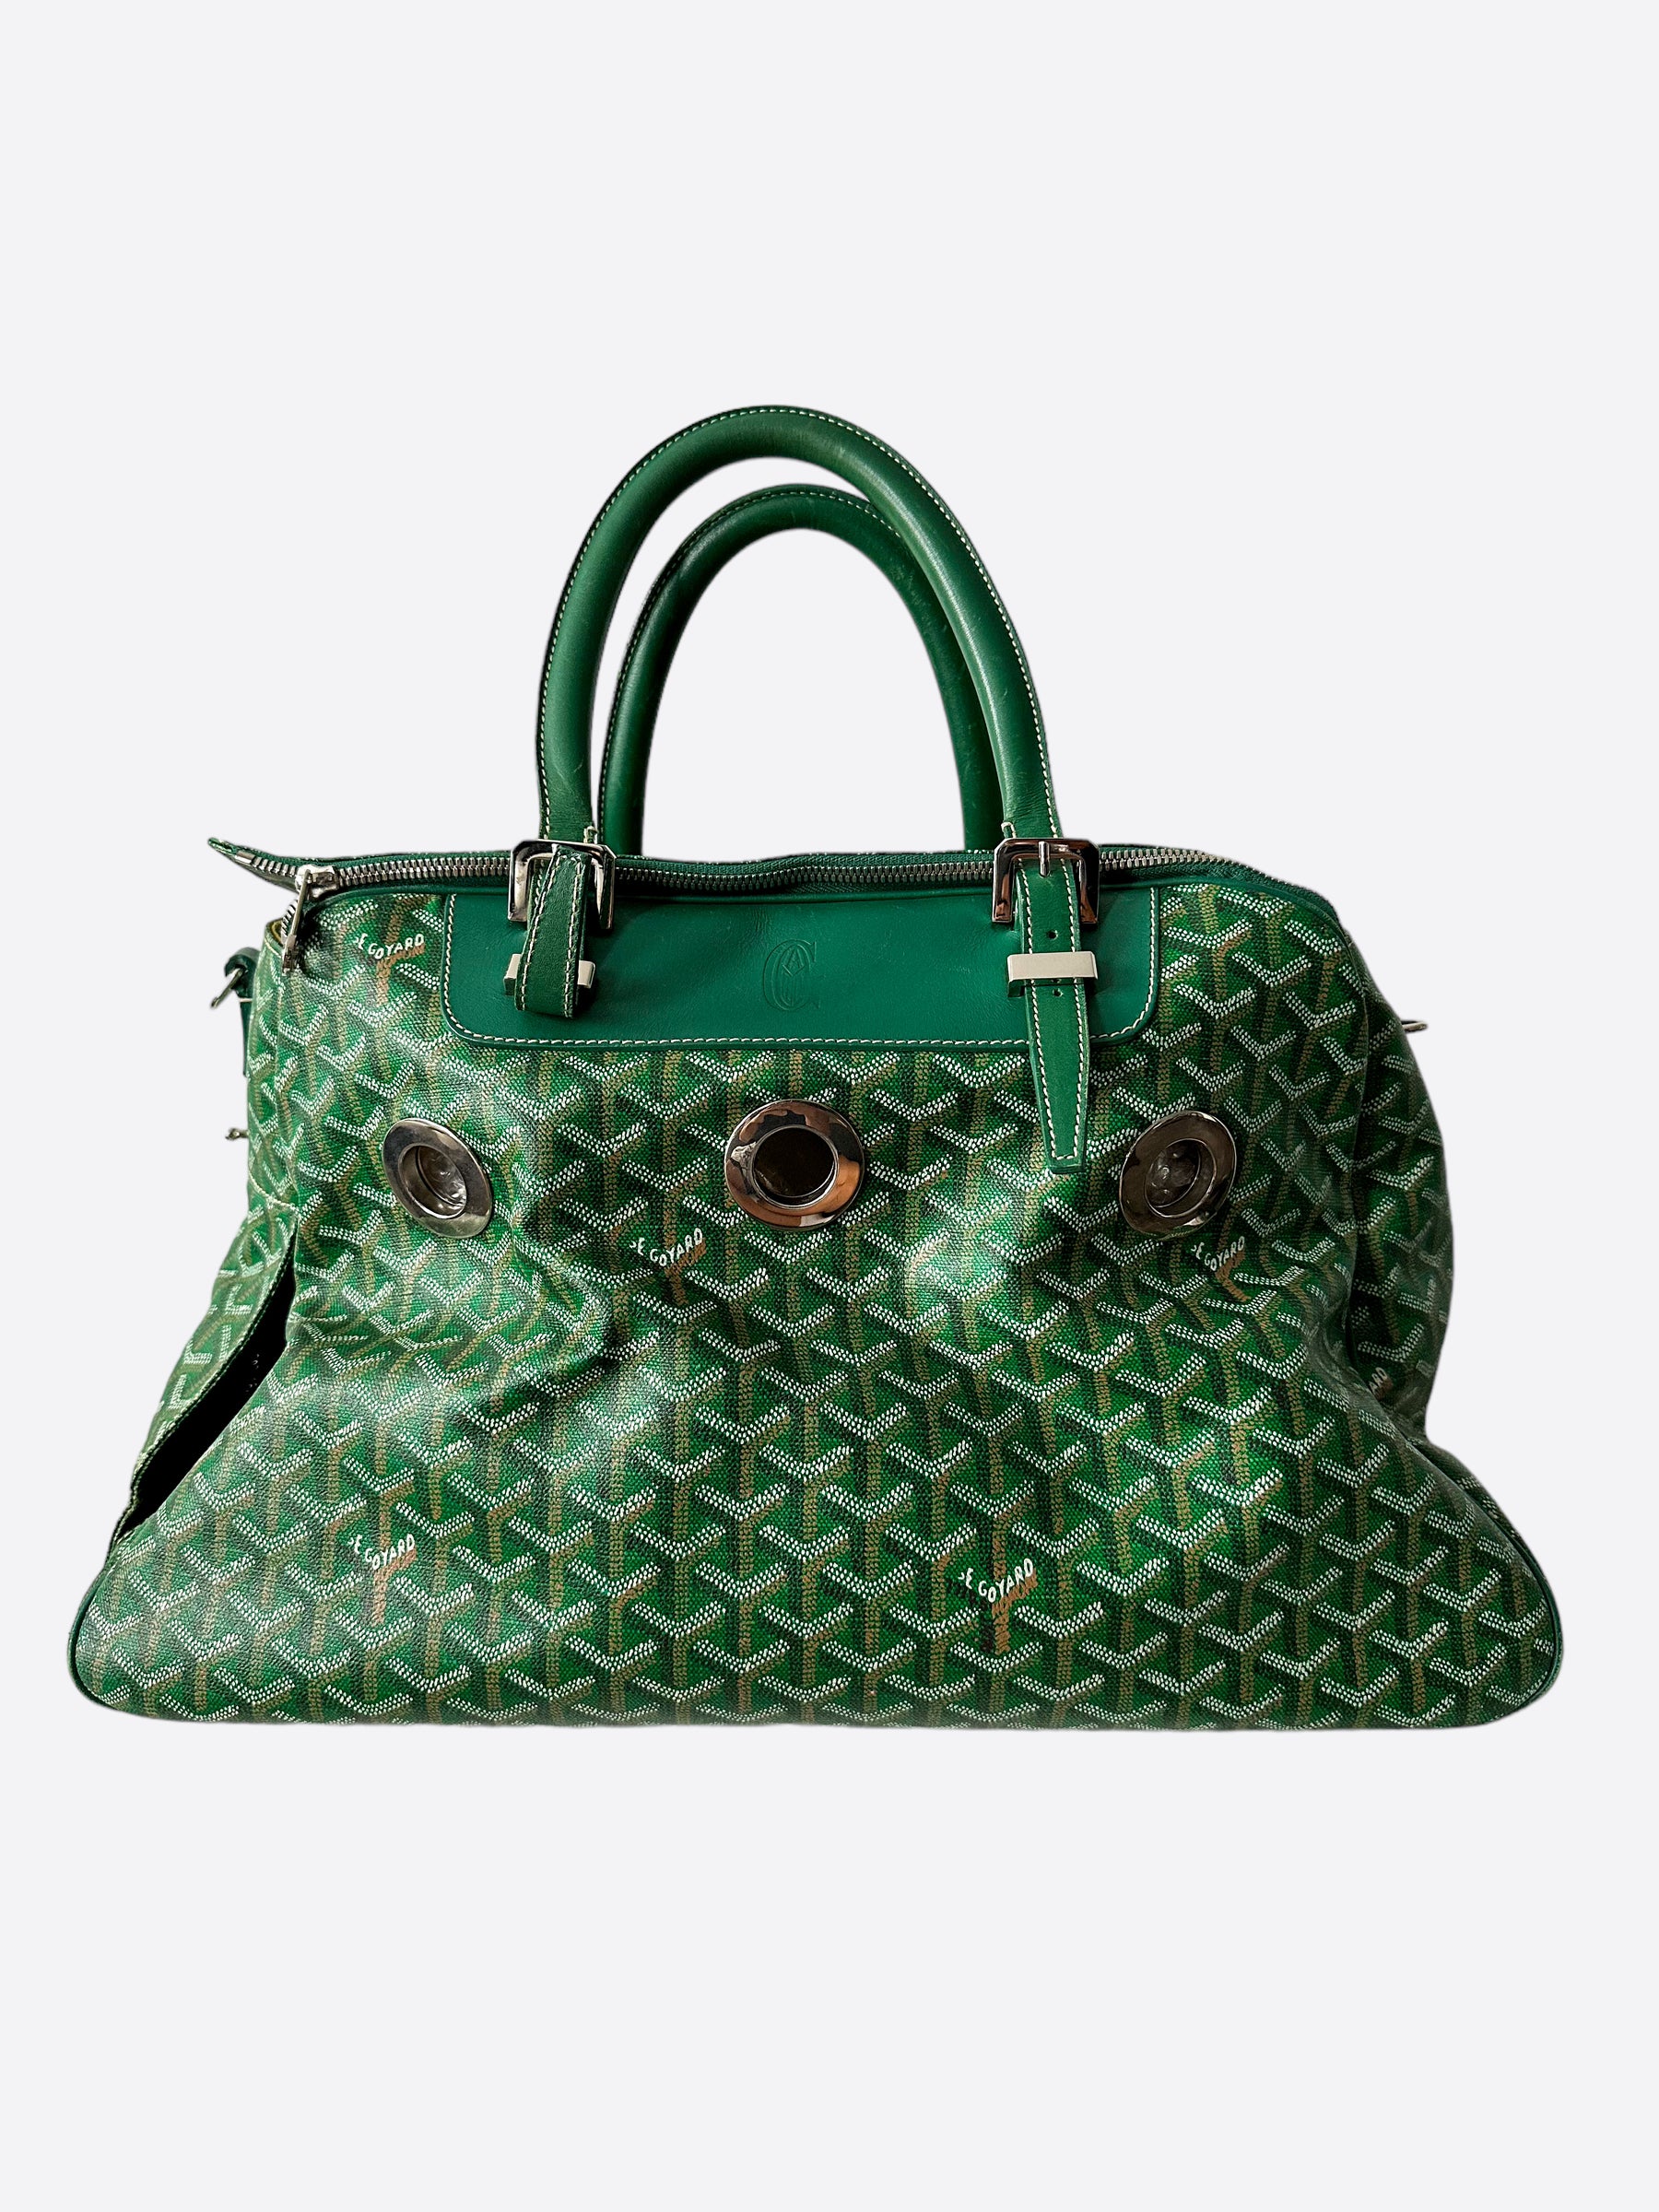 Attributed to GOYARD. Dog carrier bag in soft woven can…